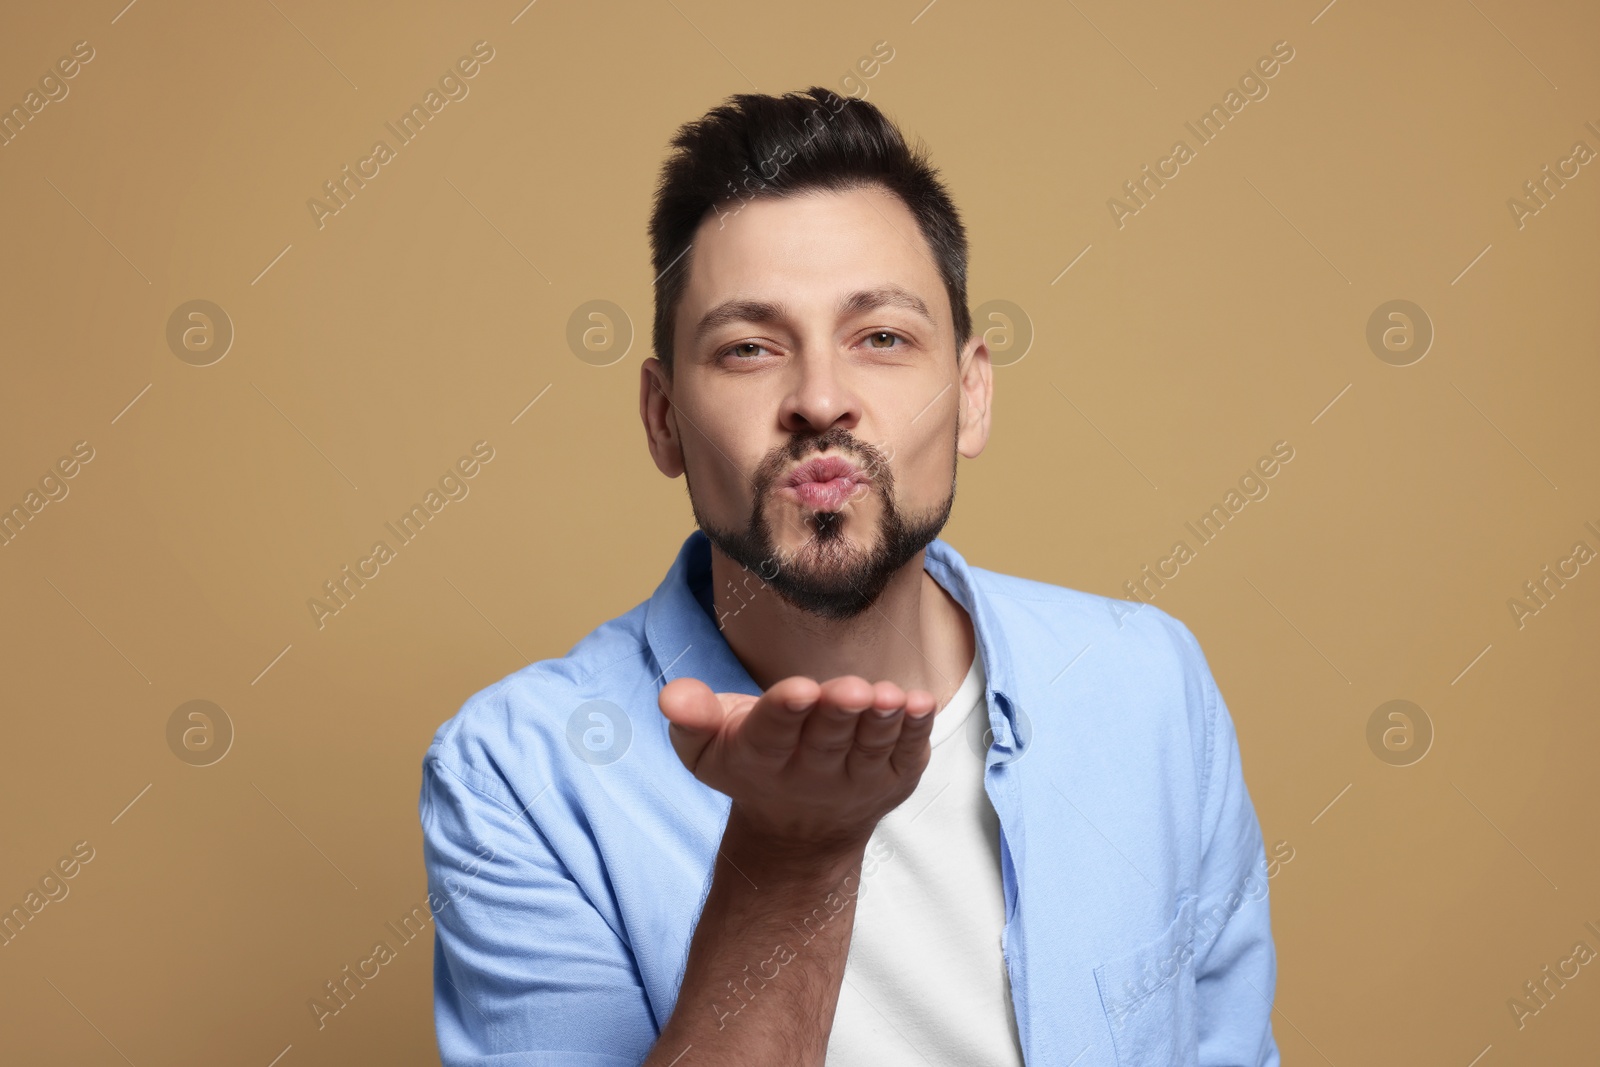 Photo of Handsome man blowing kiss on beige background